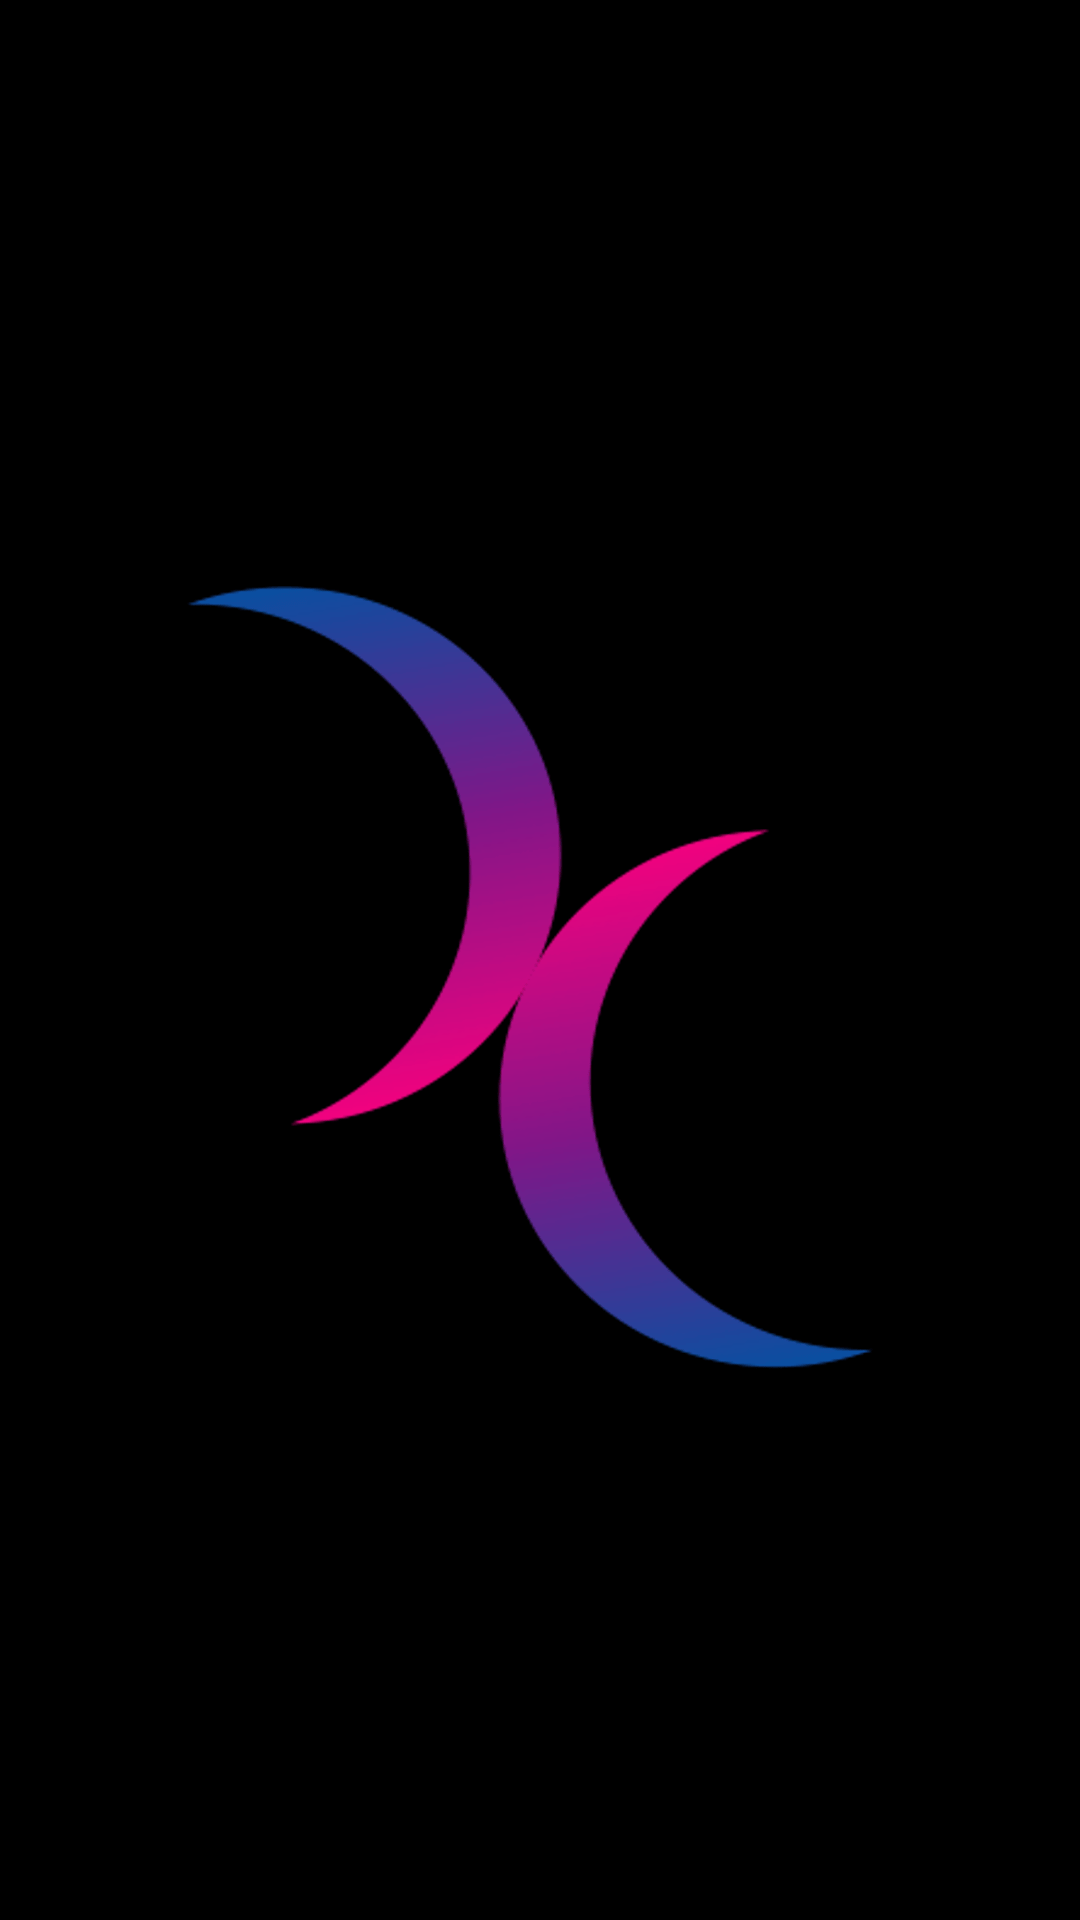 A black background with a pink and blue logo in the center. - Bisexual